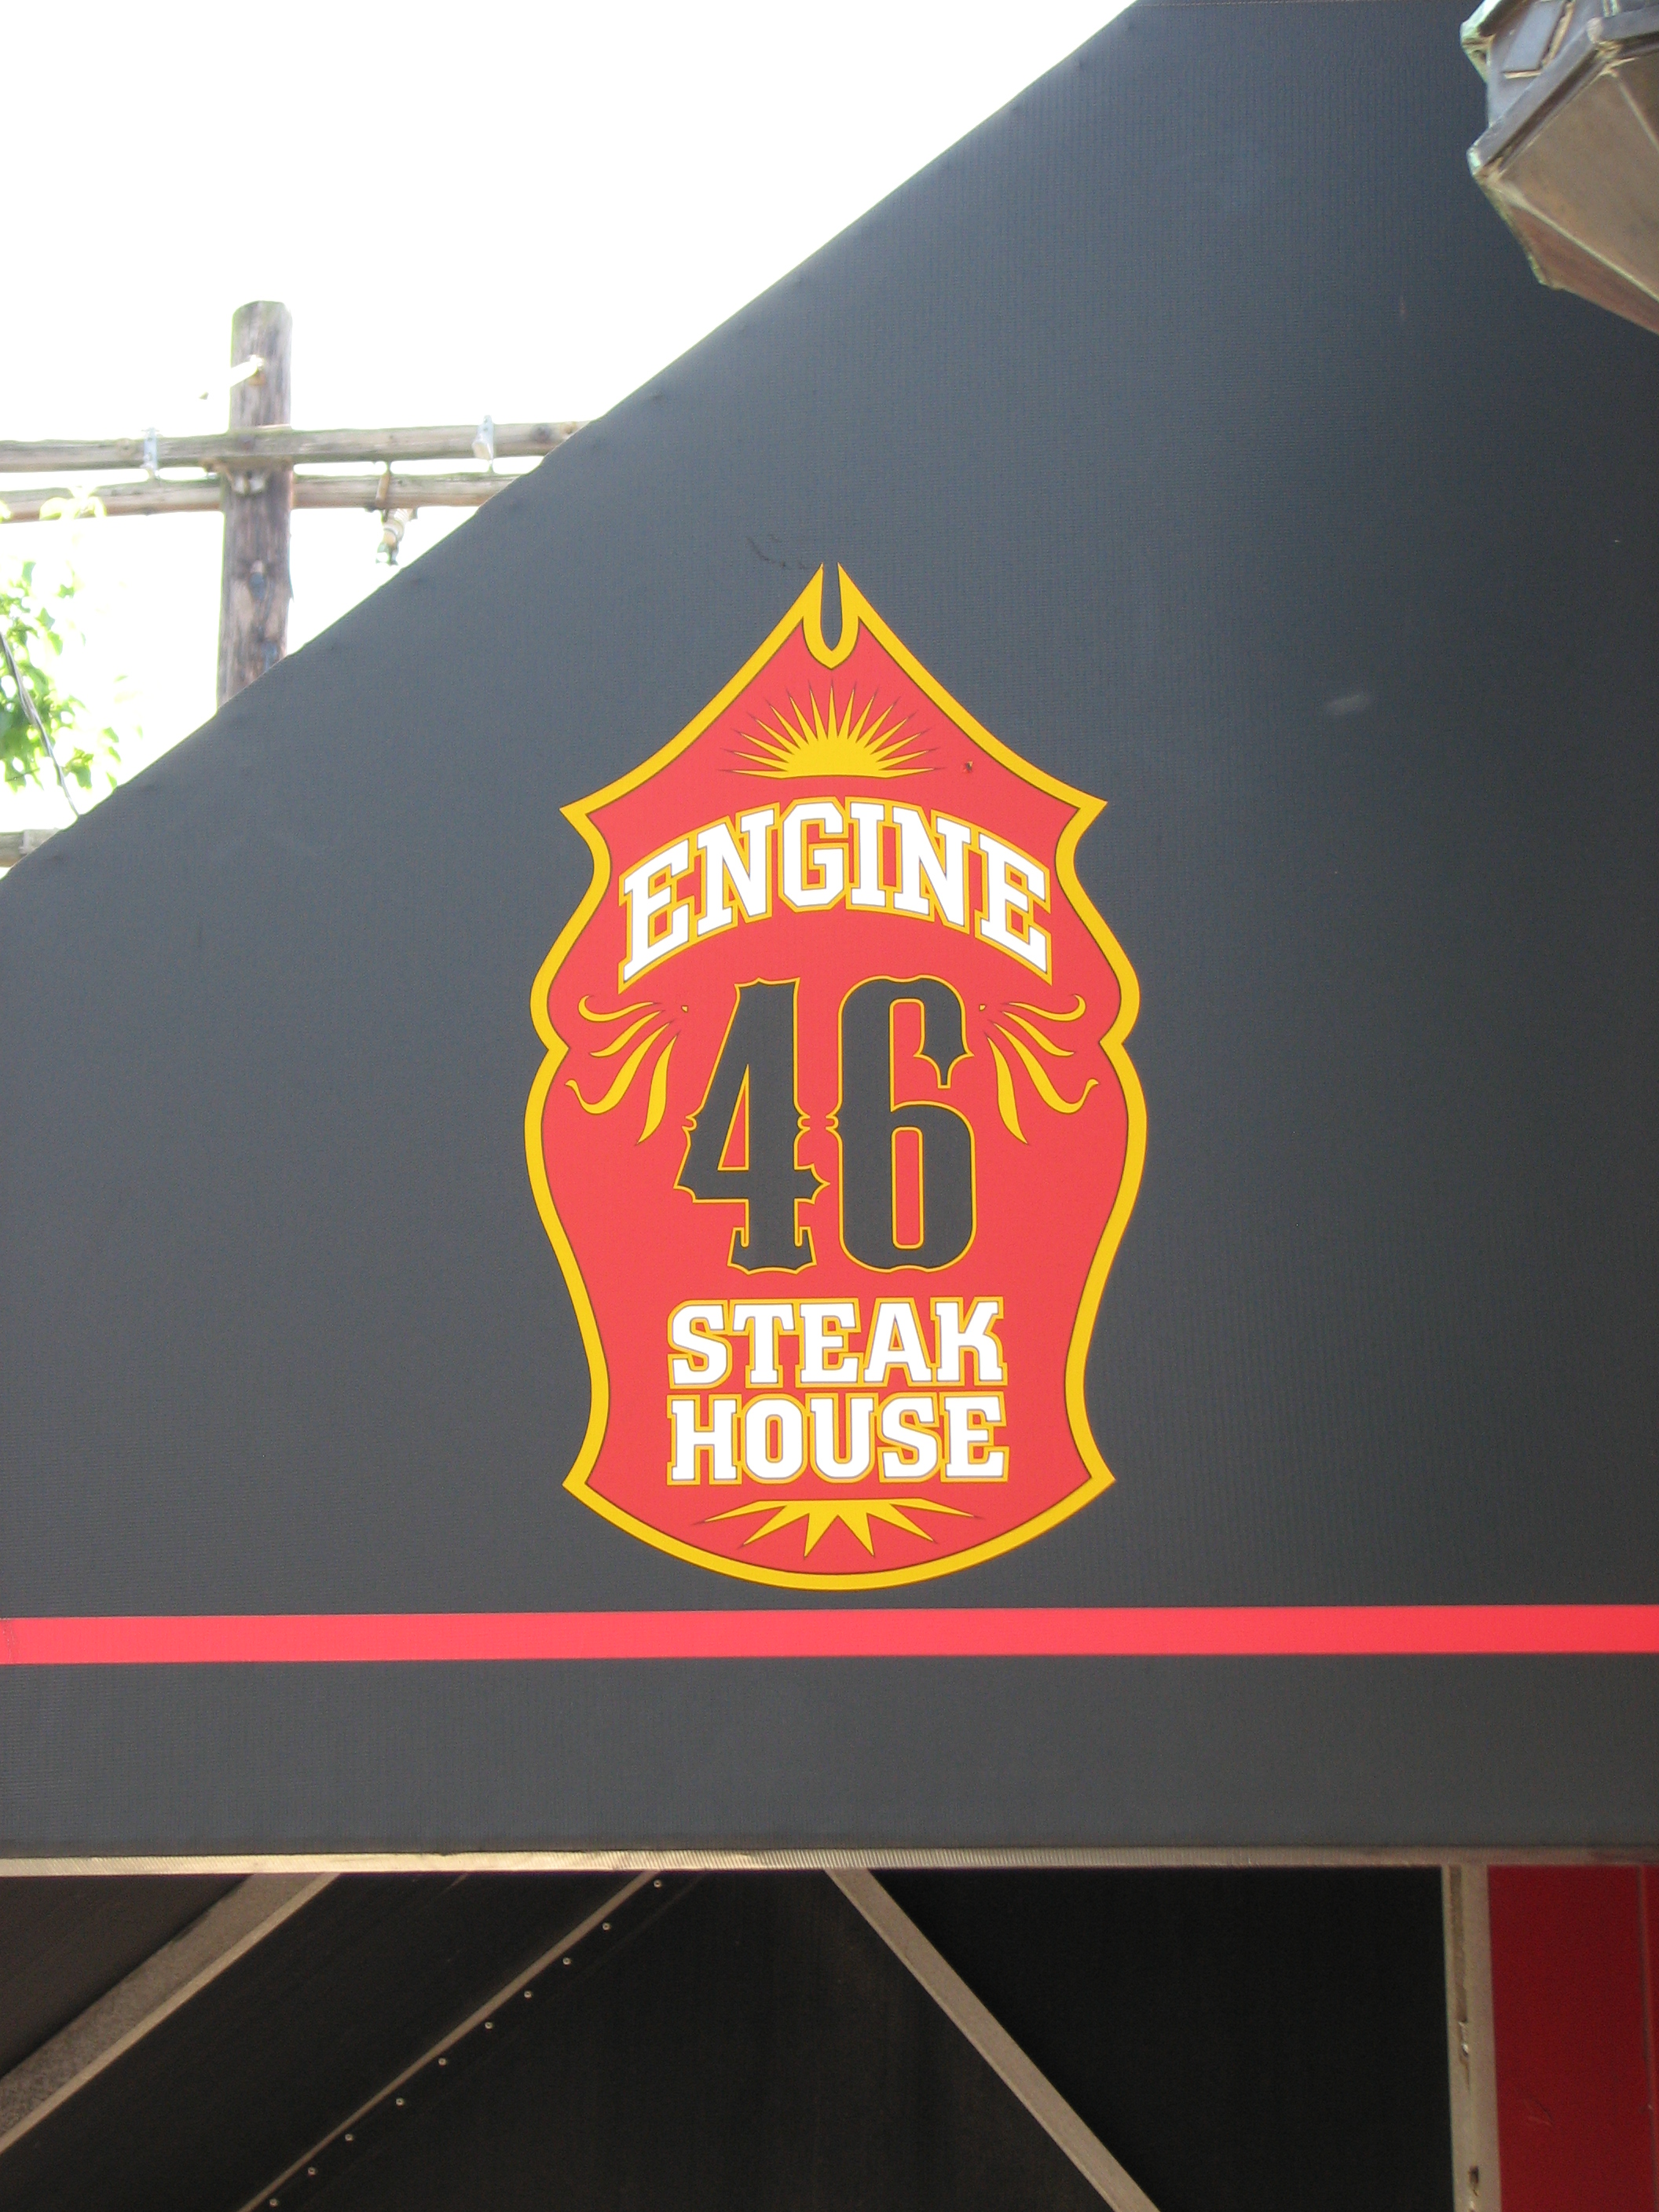 For about 10 years the firehouse was repurposed as a steakhouse.